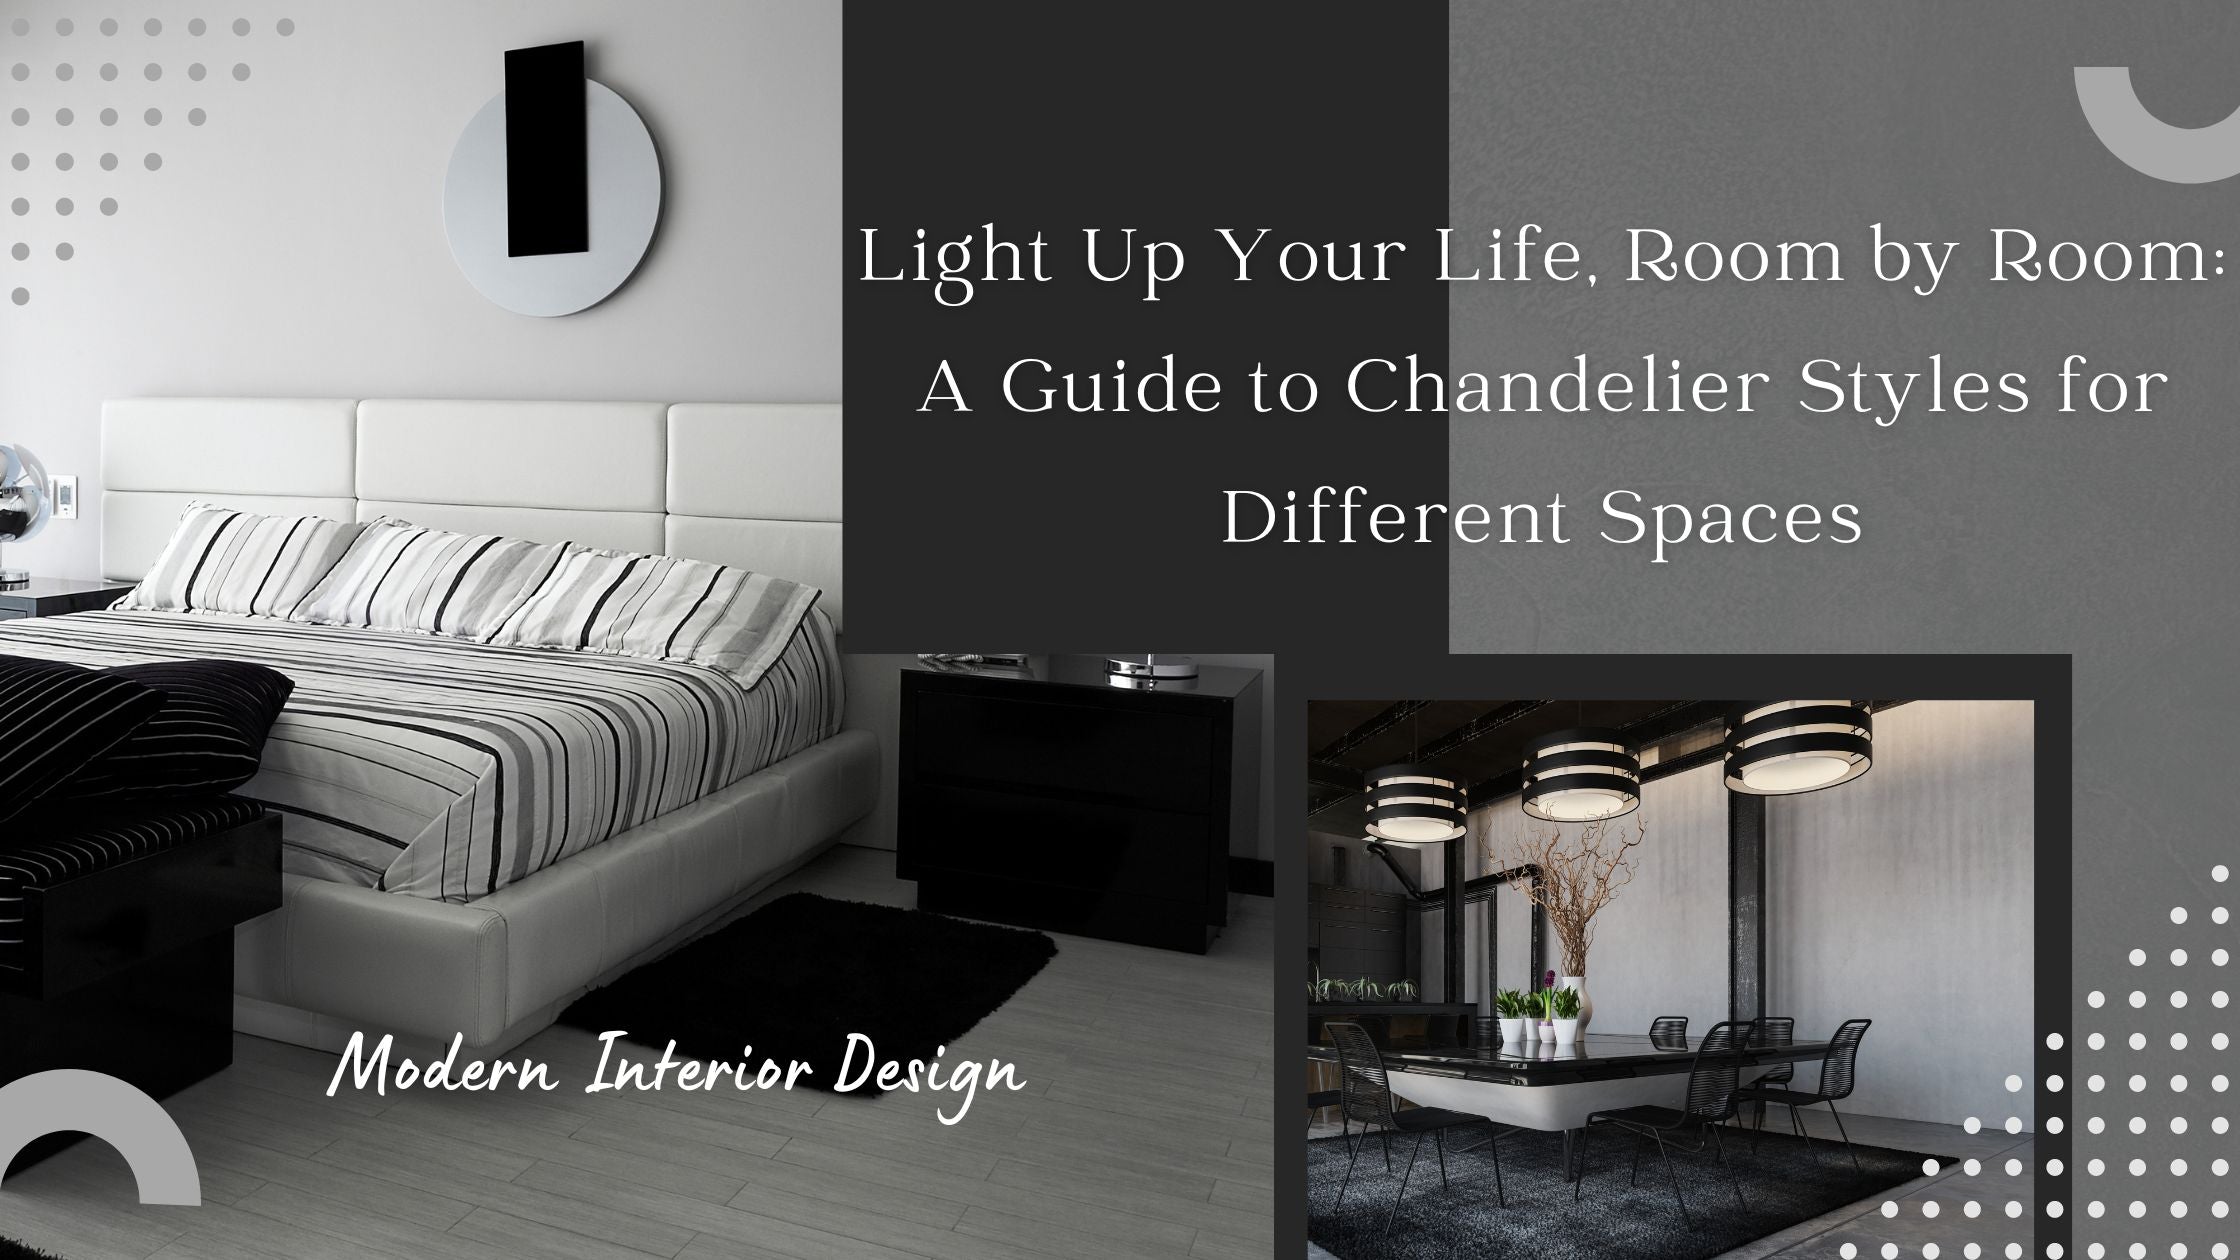 Light Up Your Life, Room by Room: A Guide to Chandelier Styles for Different Spaces